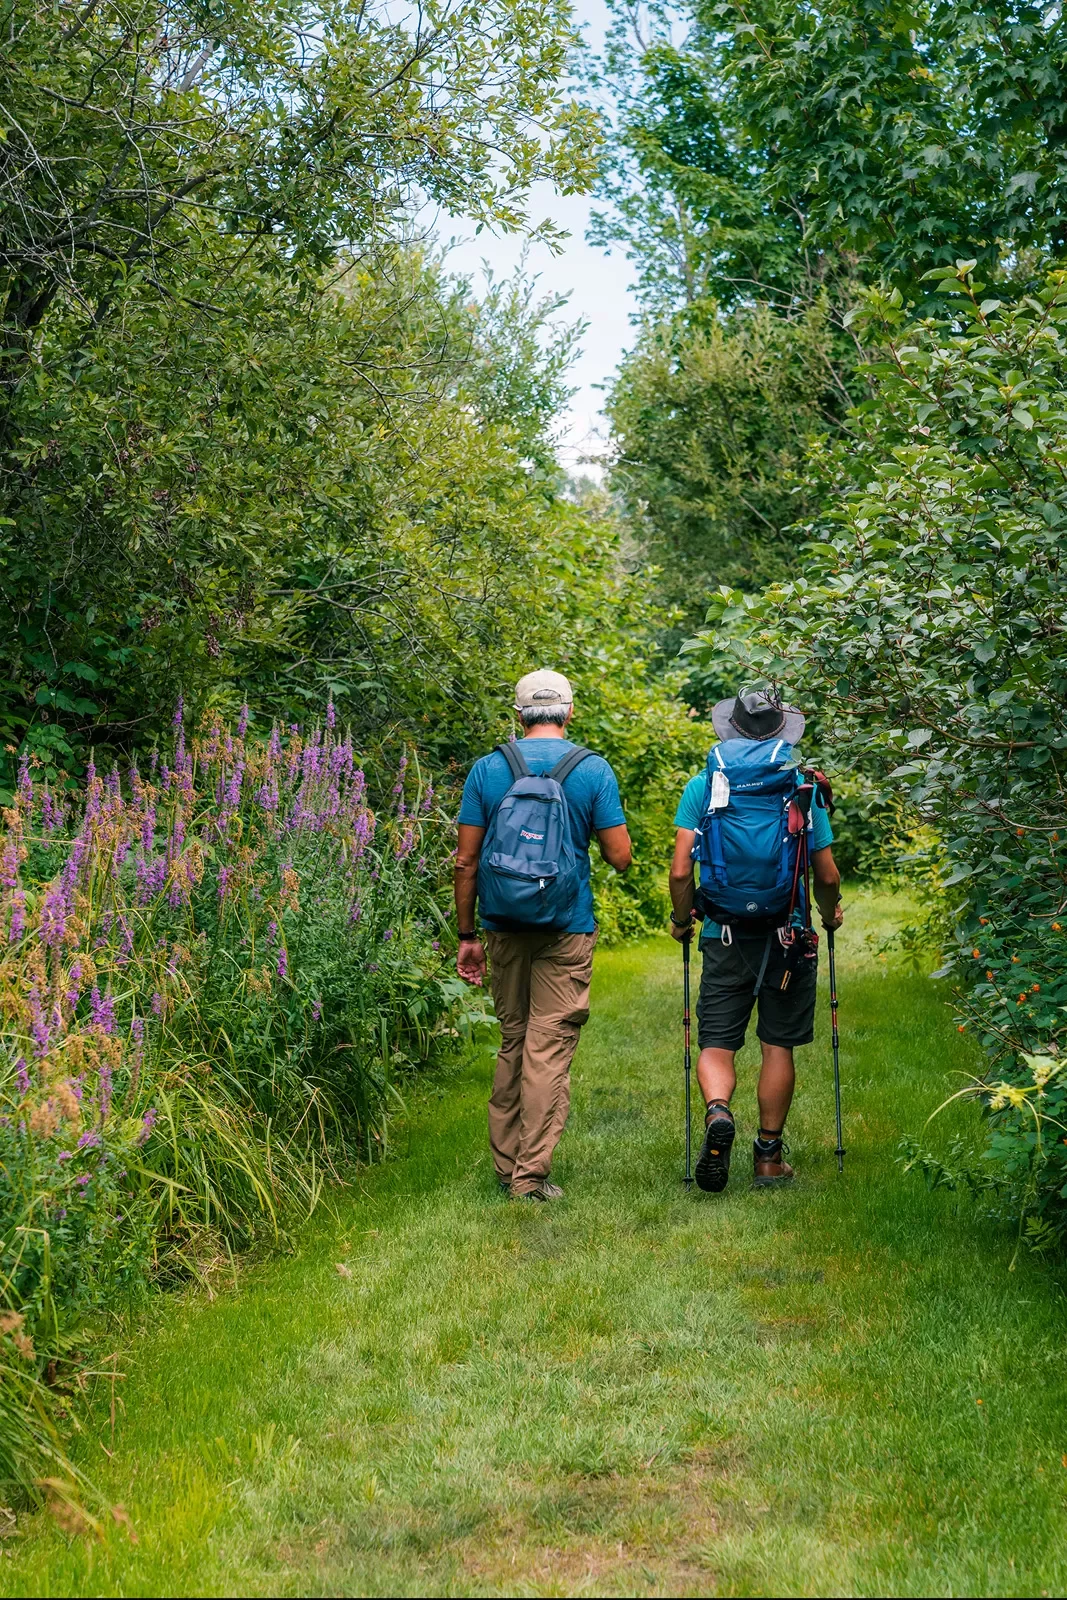 Two guests hiking down grassy path, lilac bushes to their left.